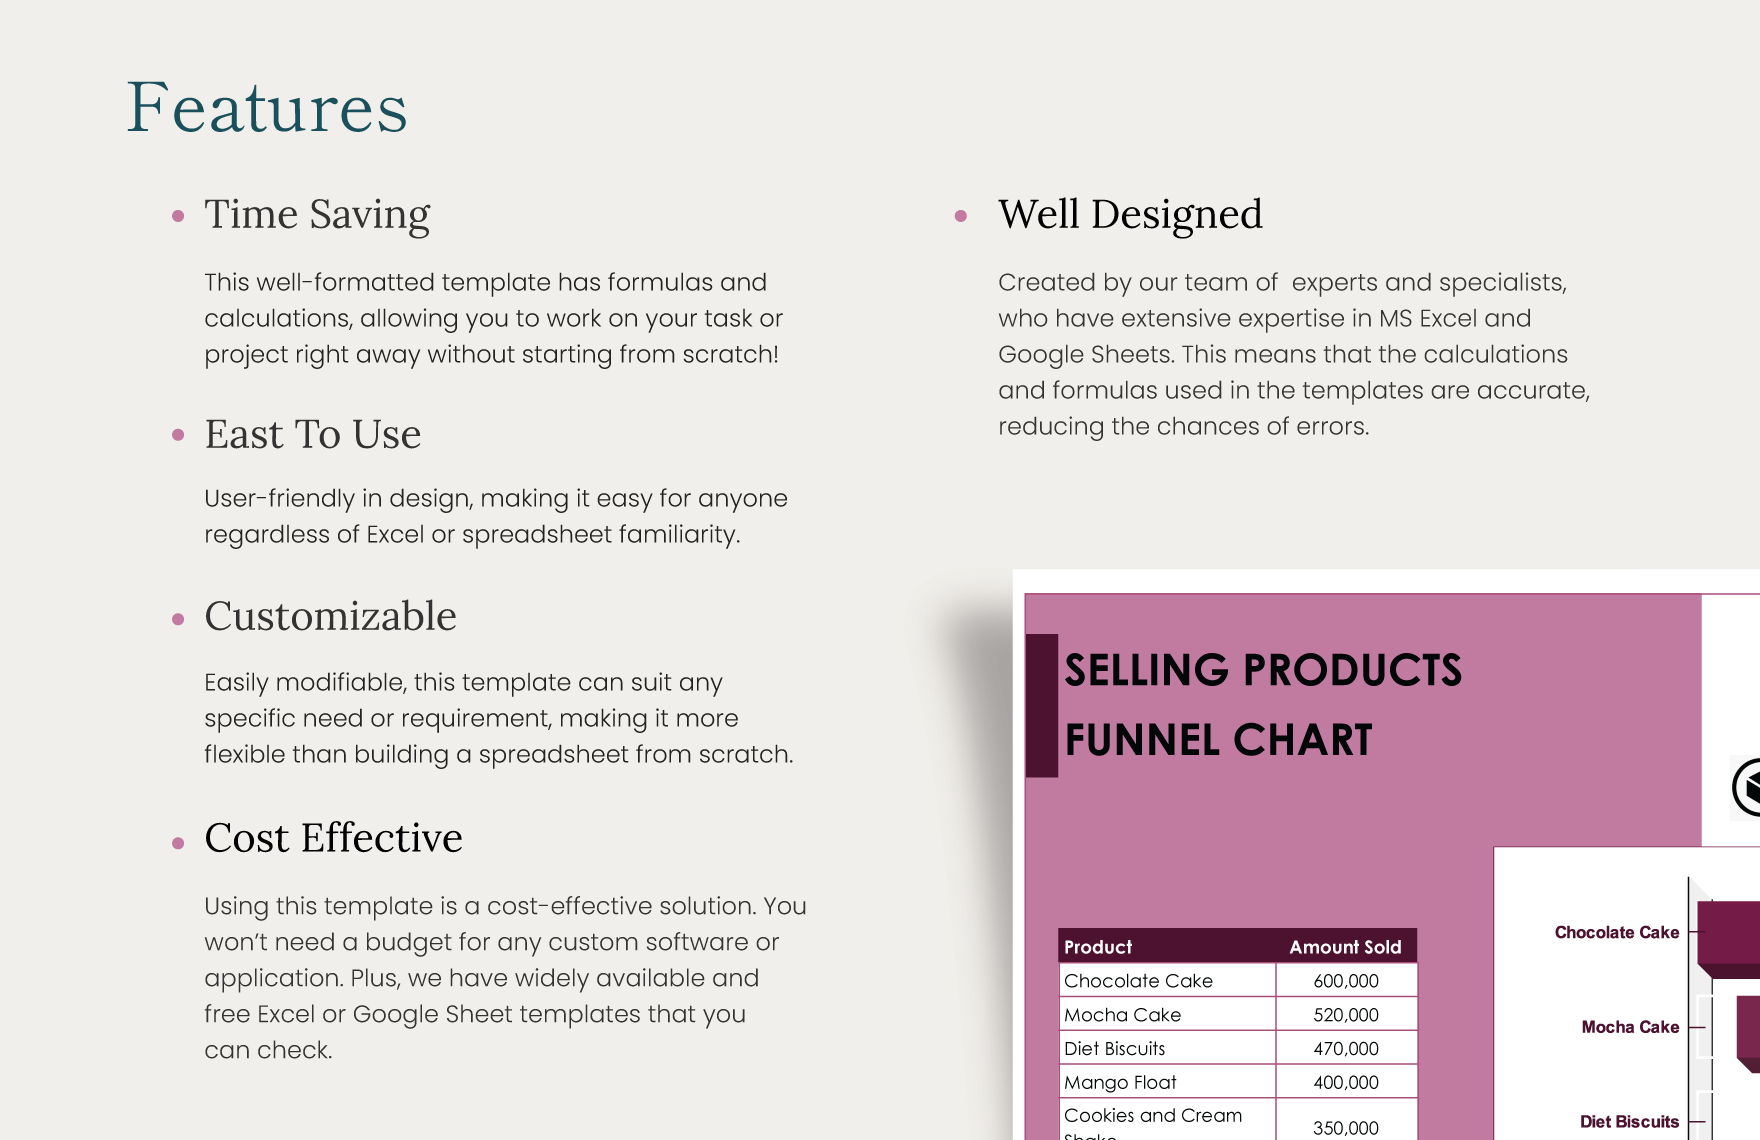 Selling Products Funnel Chart